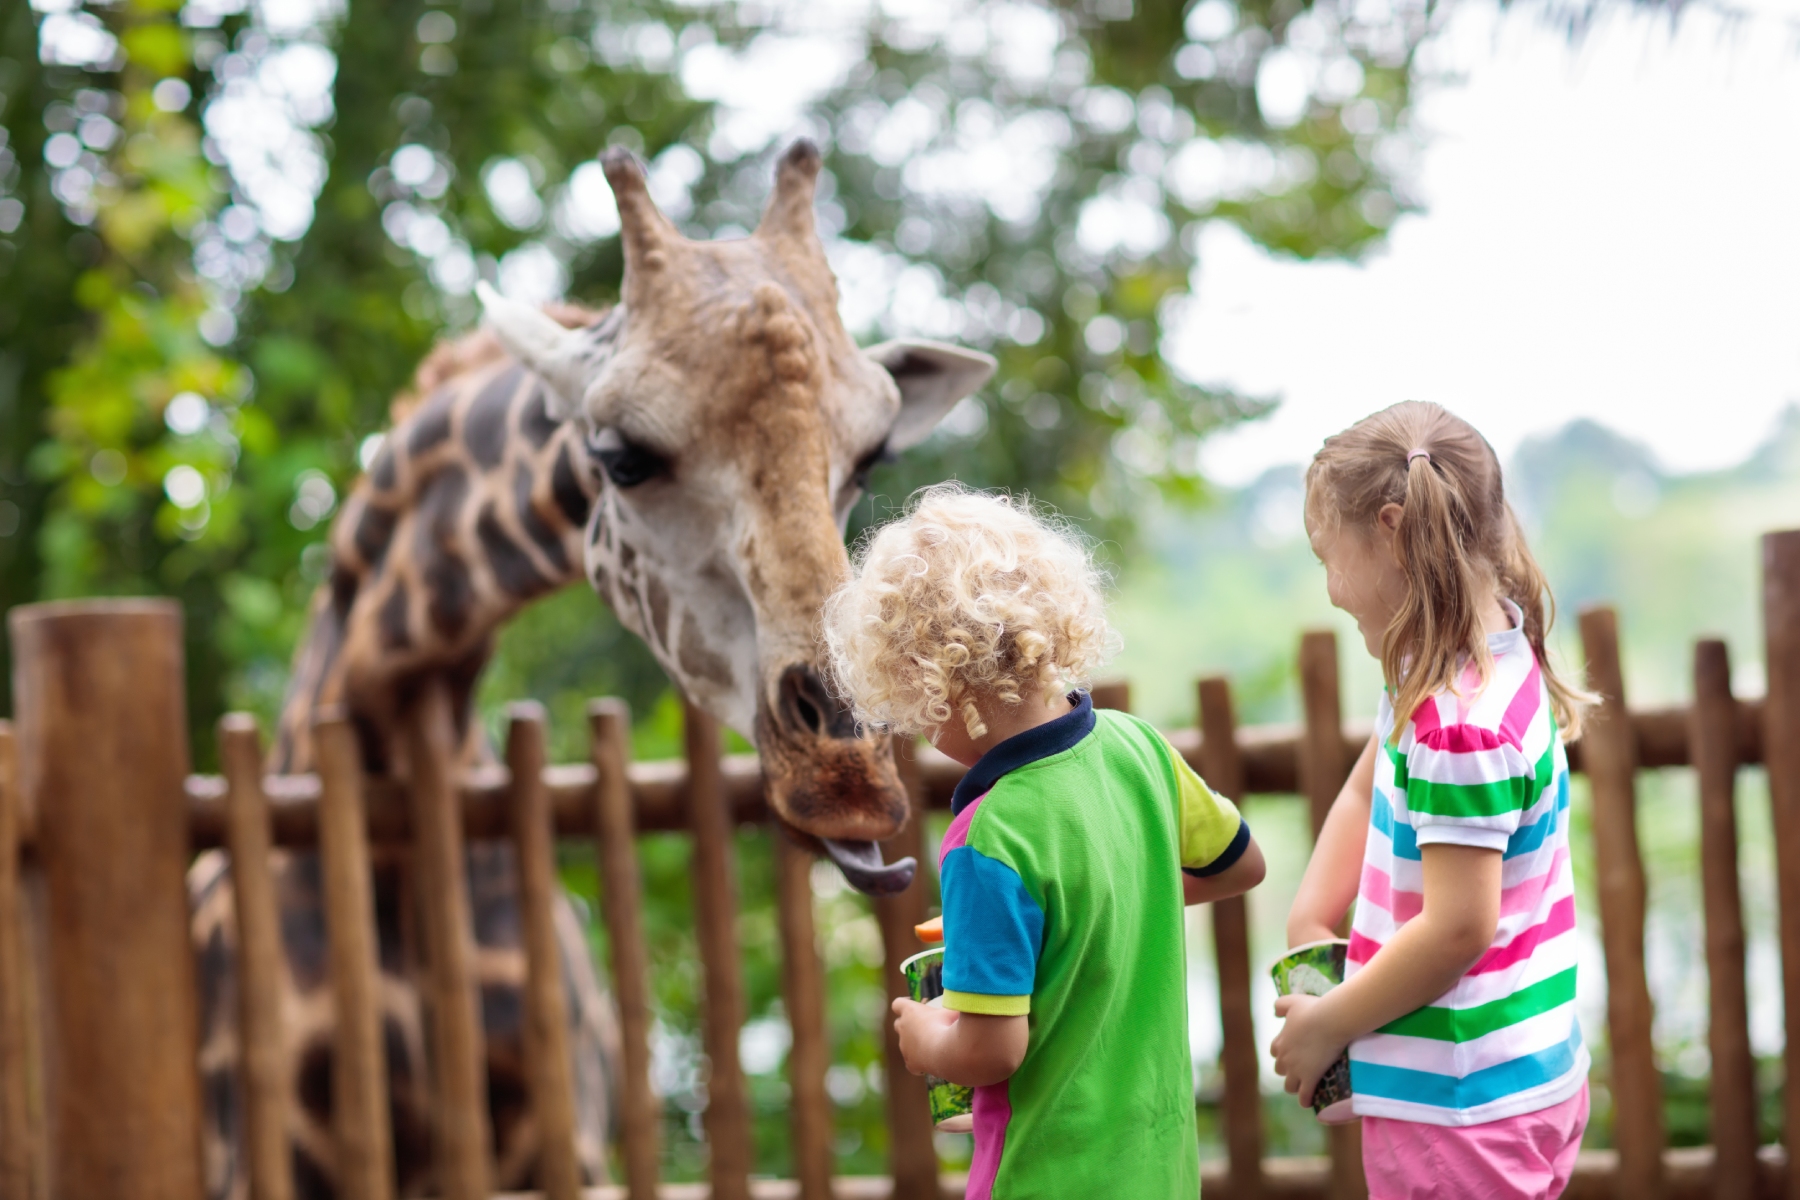 Two children feeding a giraffe at a zoo in Singapore